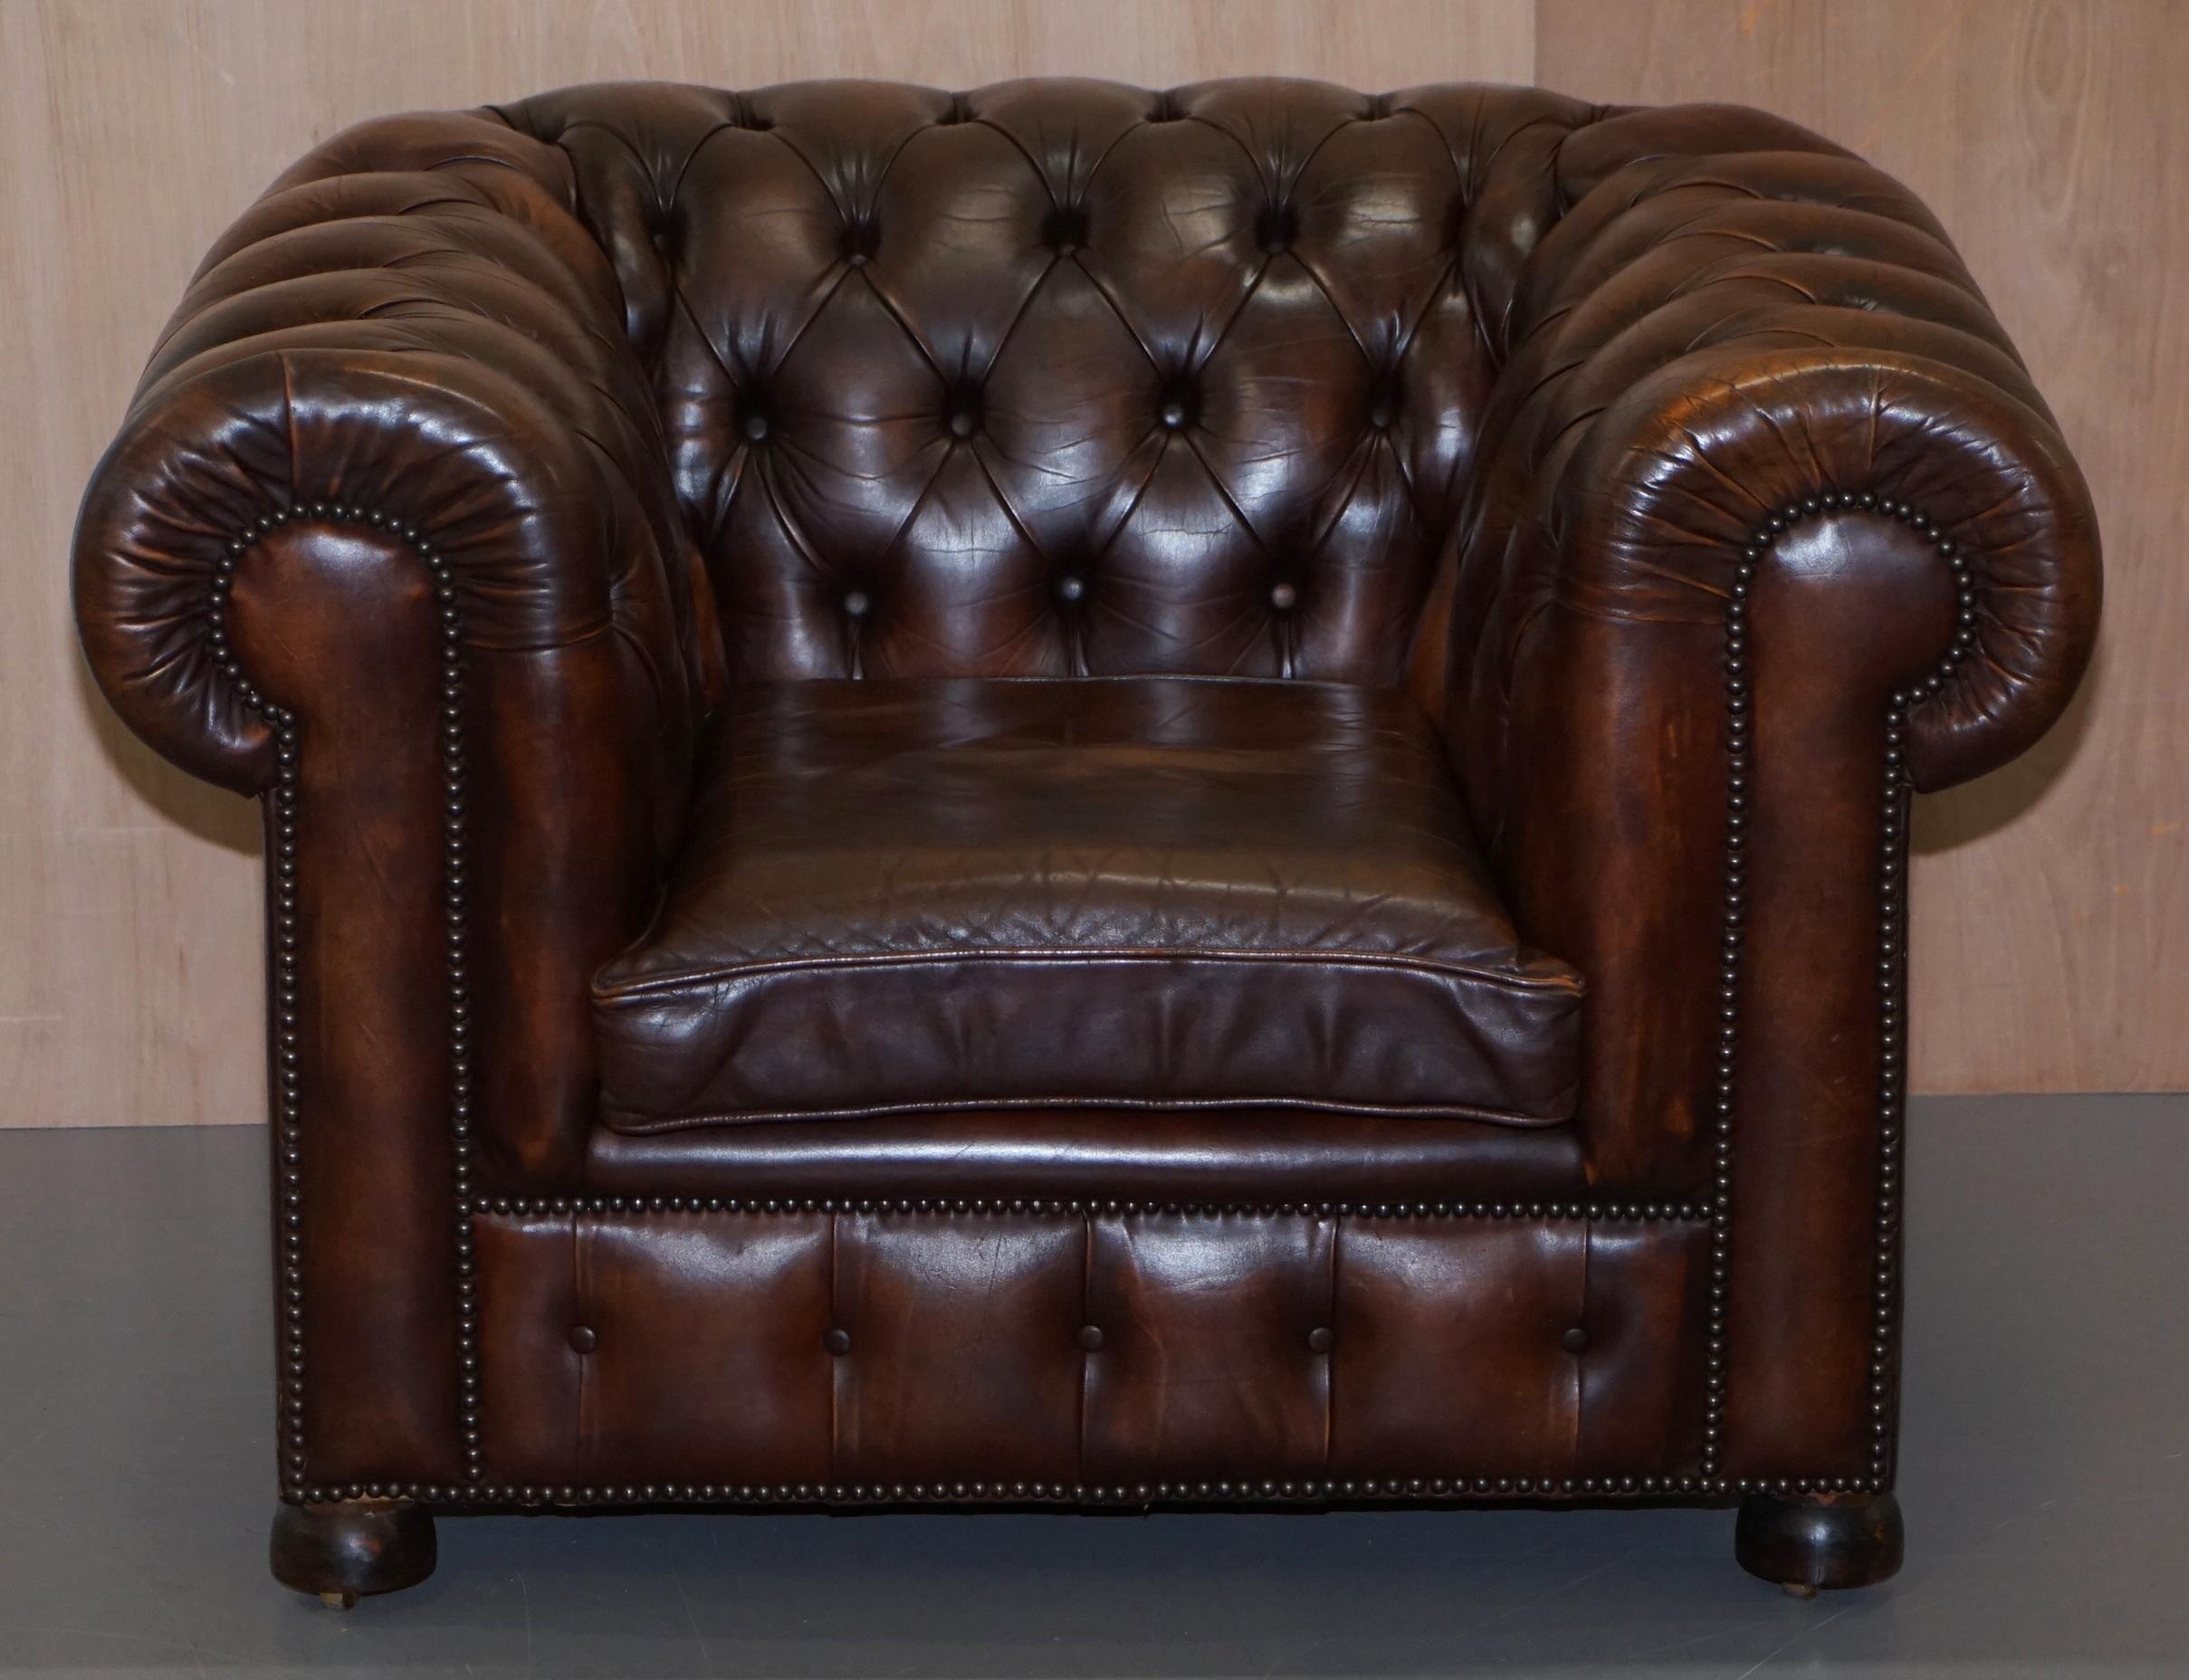 We are delighted to offer for sale this lovely vintage Art Deco circa 1920s aged hand dyed brown leather armchair with coil sprung base

This is a very good looking well made and comfortable chair, the base is fully coil sprung using traditional